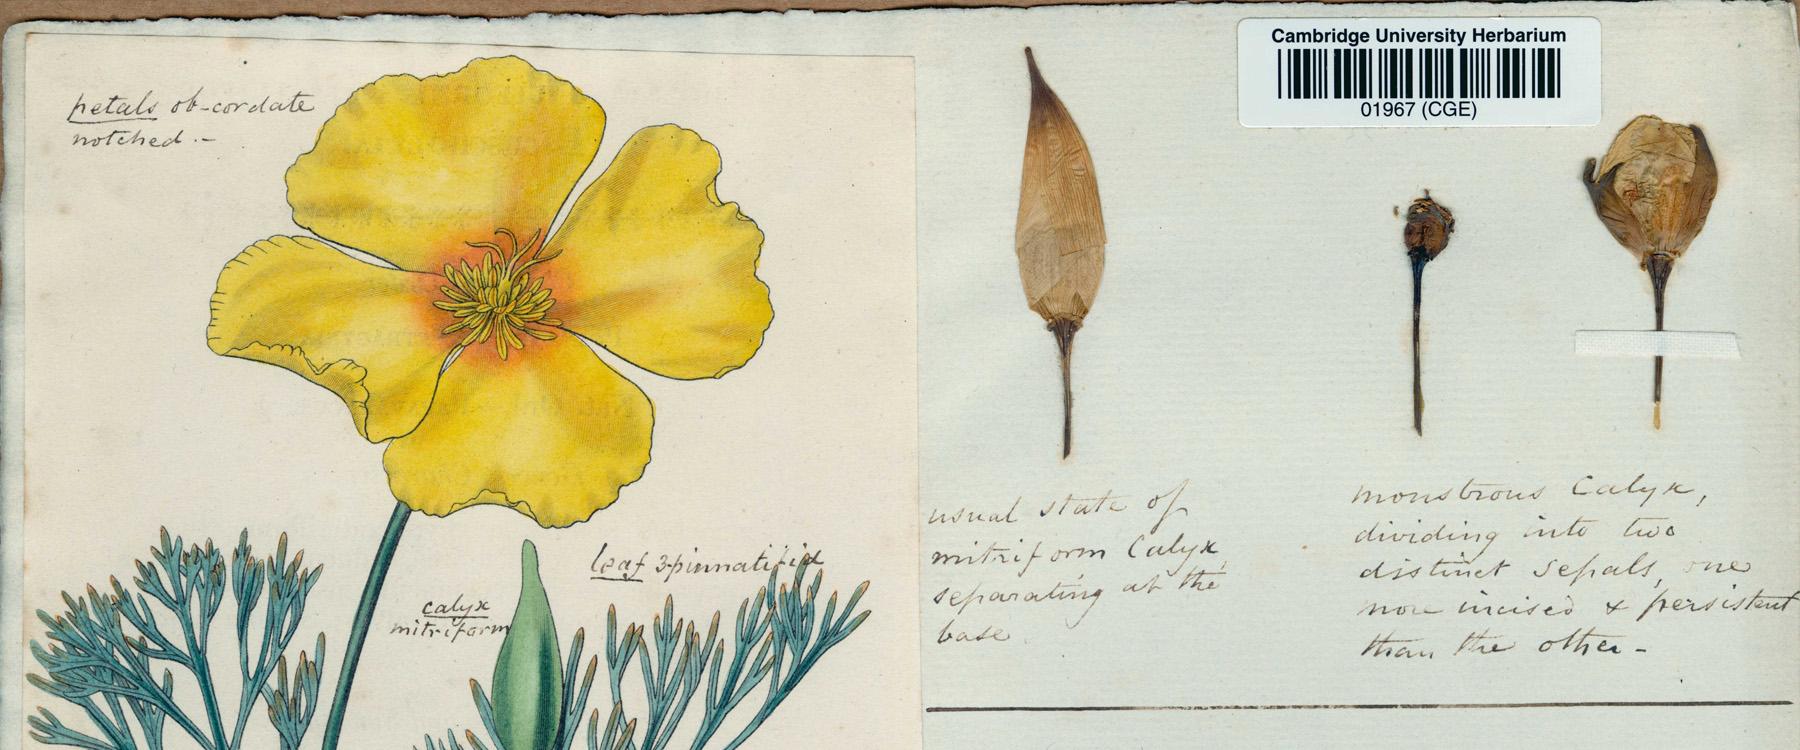 Herbarium entry, one side has a large painting of a yellow flower. The other samples of the flower heads.